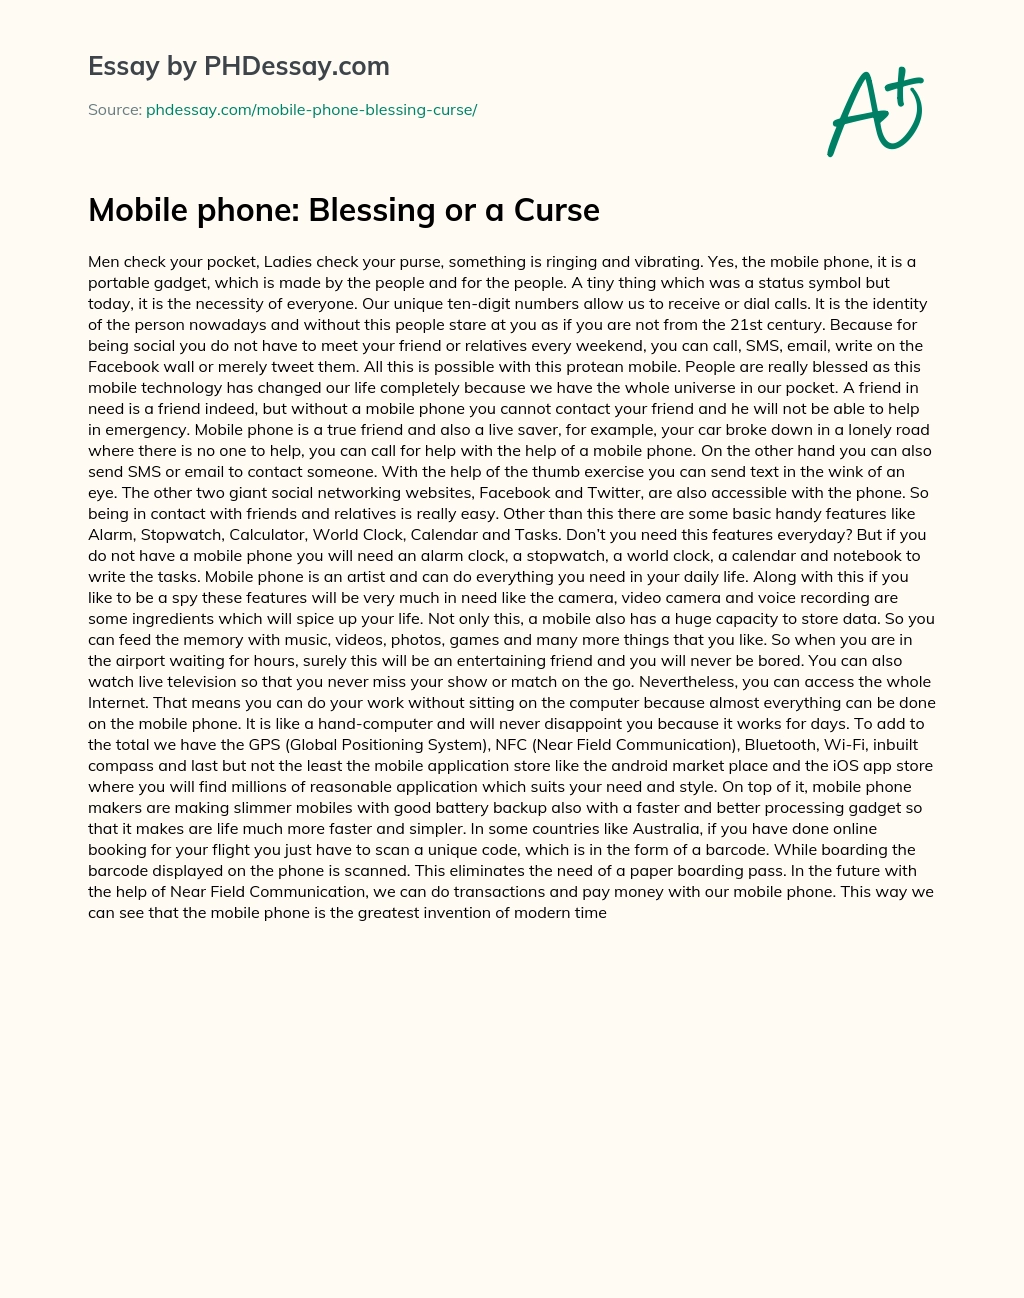 Mobile phone: Blessing or a Curse essay